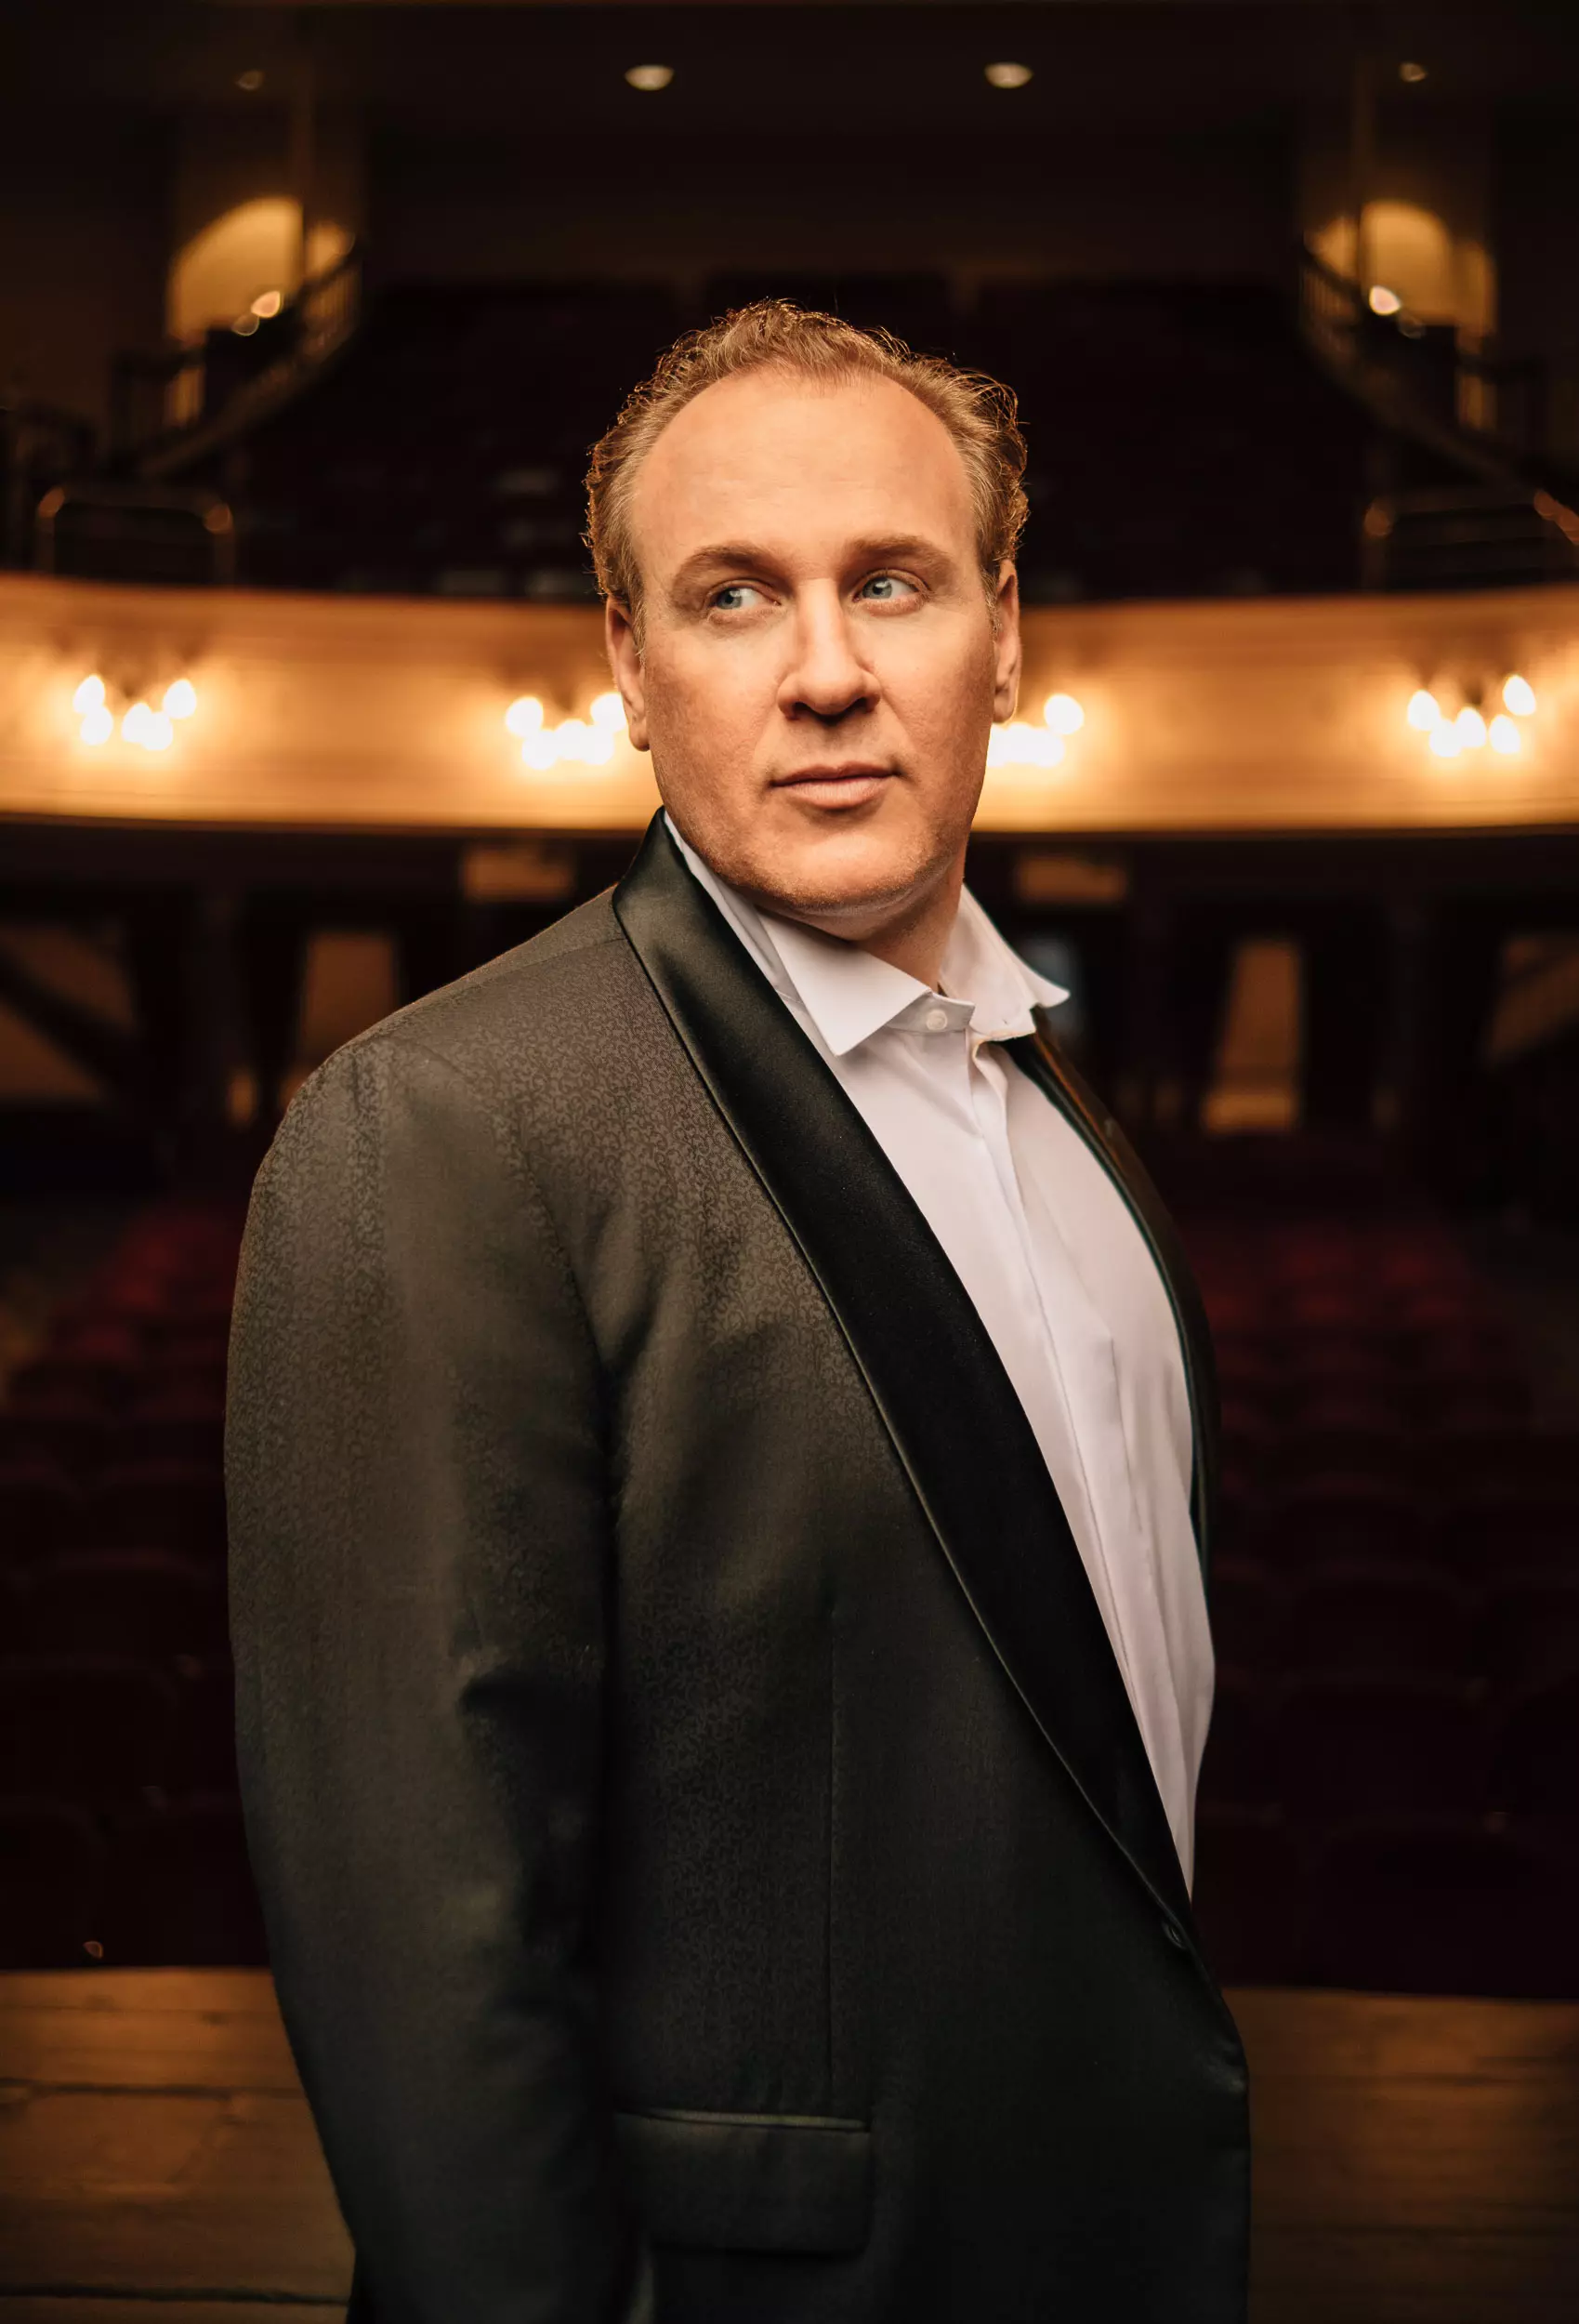 Lucas Meachem, Baritone, dramatically-lit and wearing a tuxedo in an empty theatre, looking off to the left.